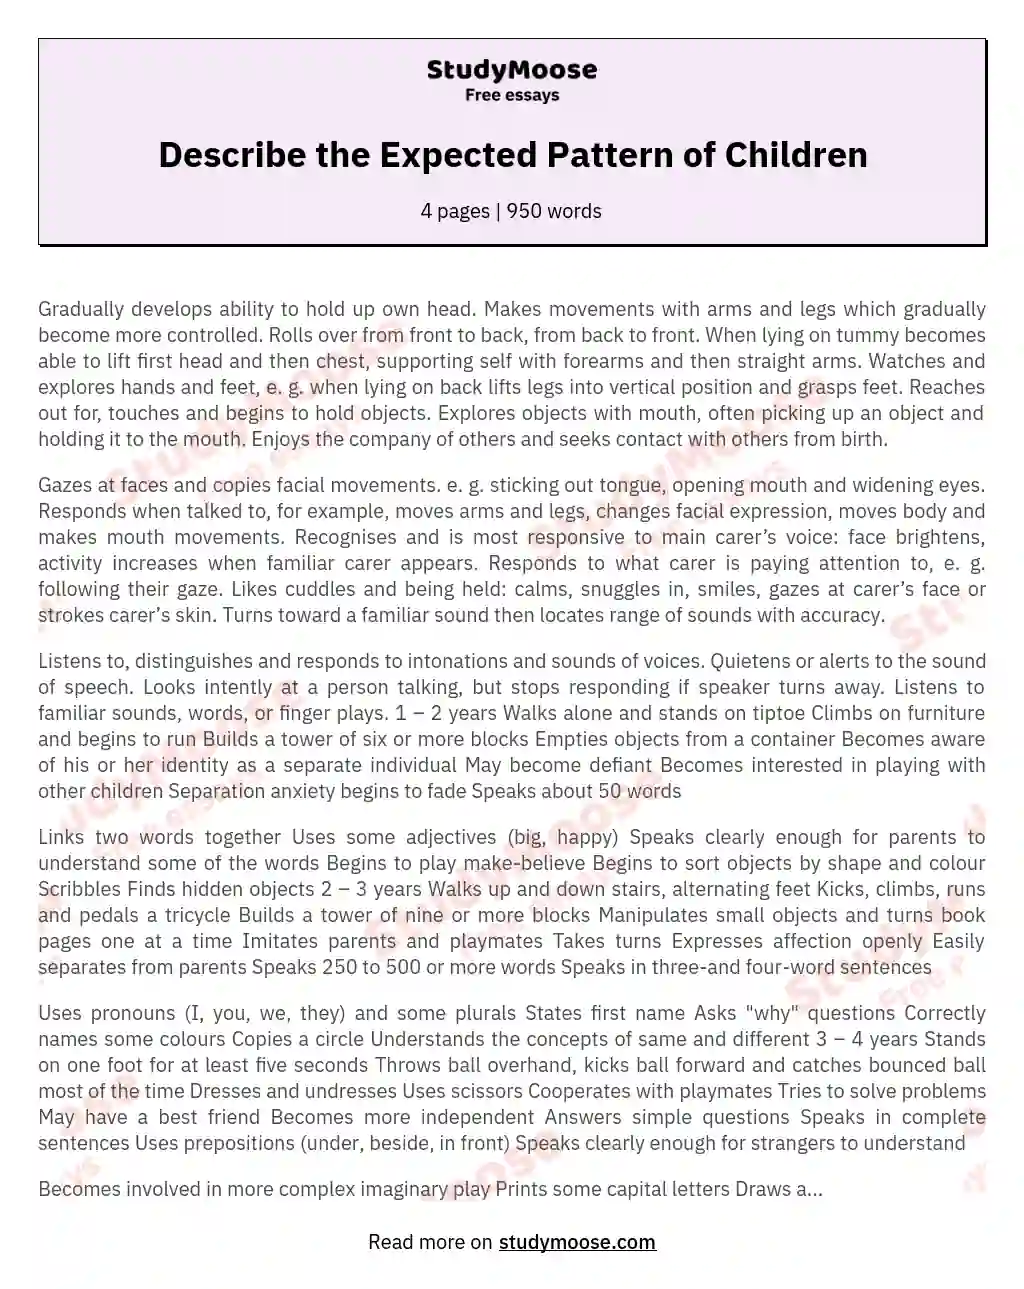 Describe the Expected Pattern of Children essay